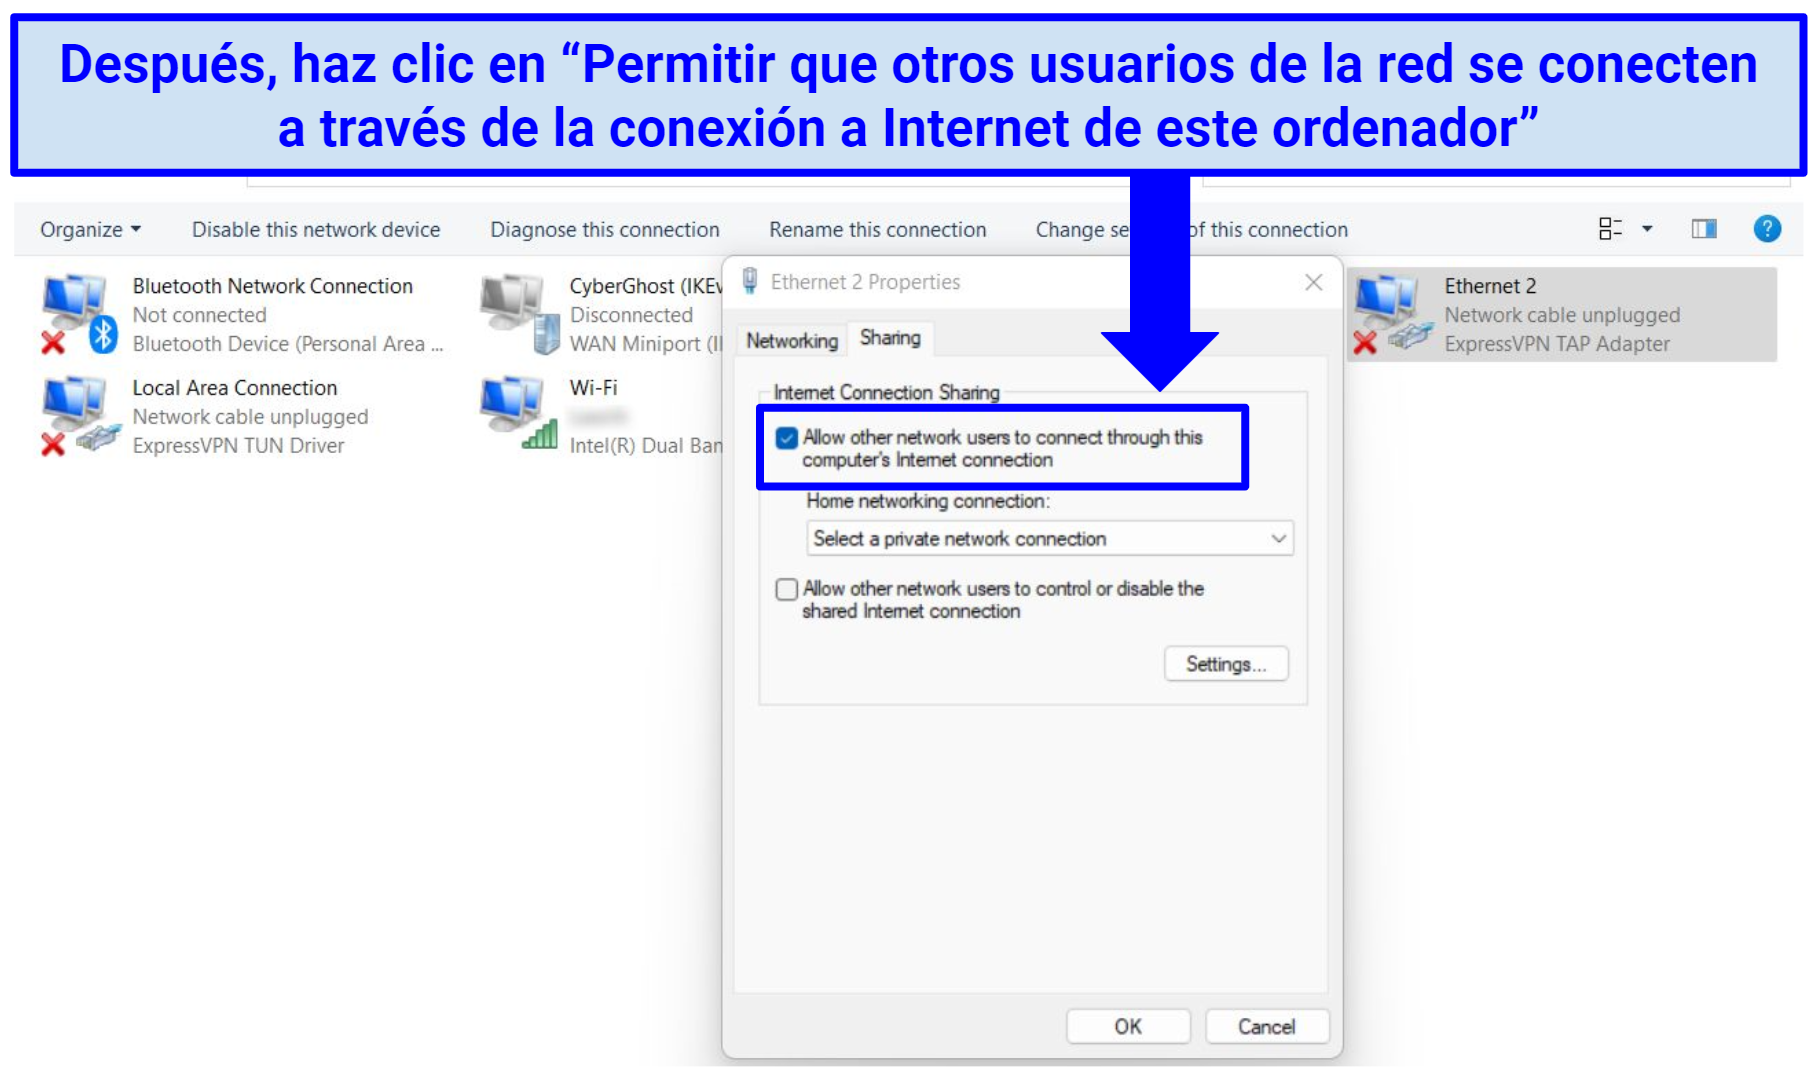 A screenshot showing how to allow other users to connect through your computer's internet connection on Windows 